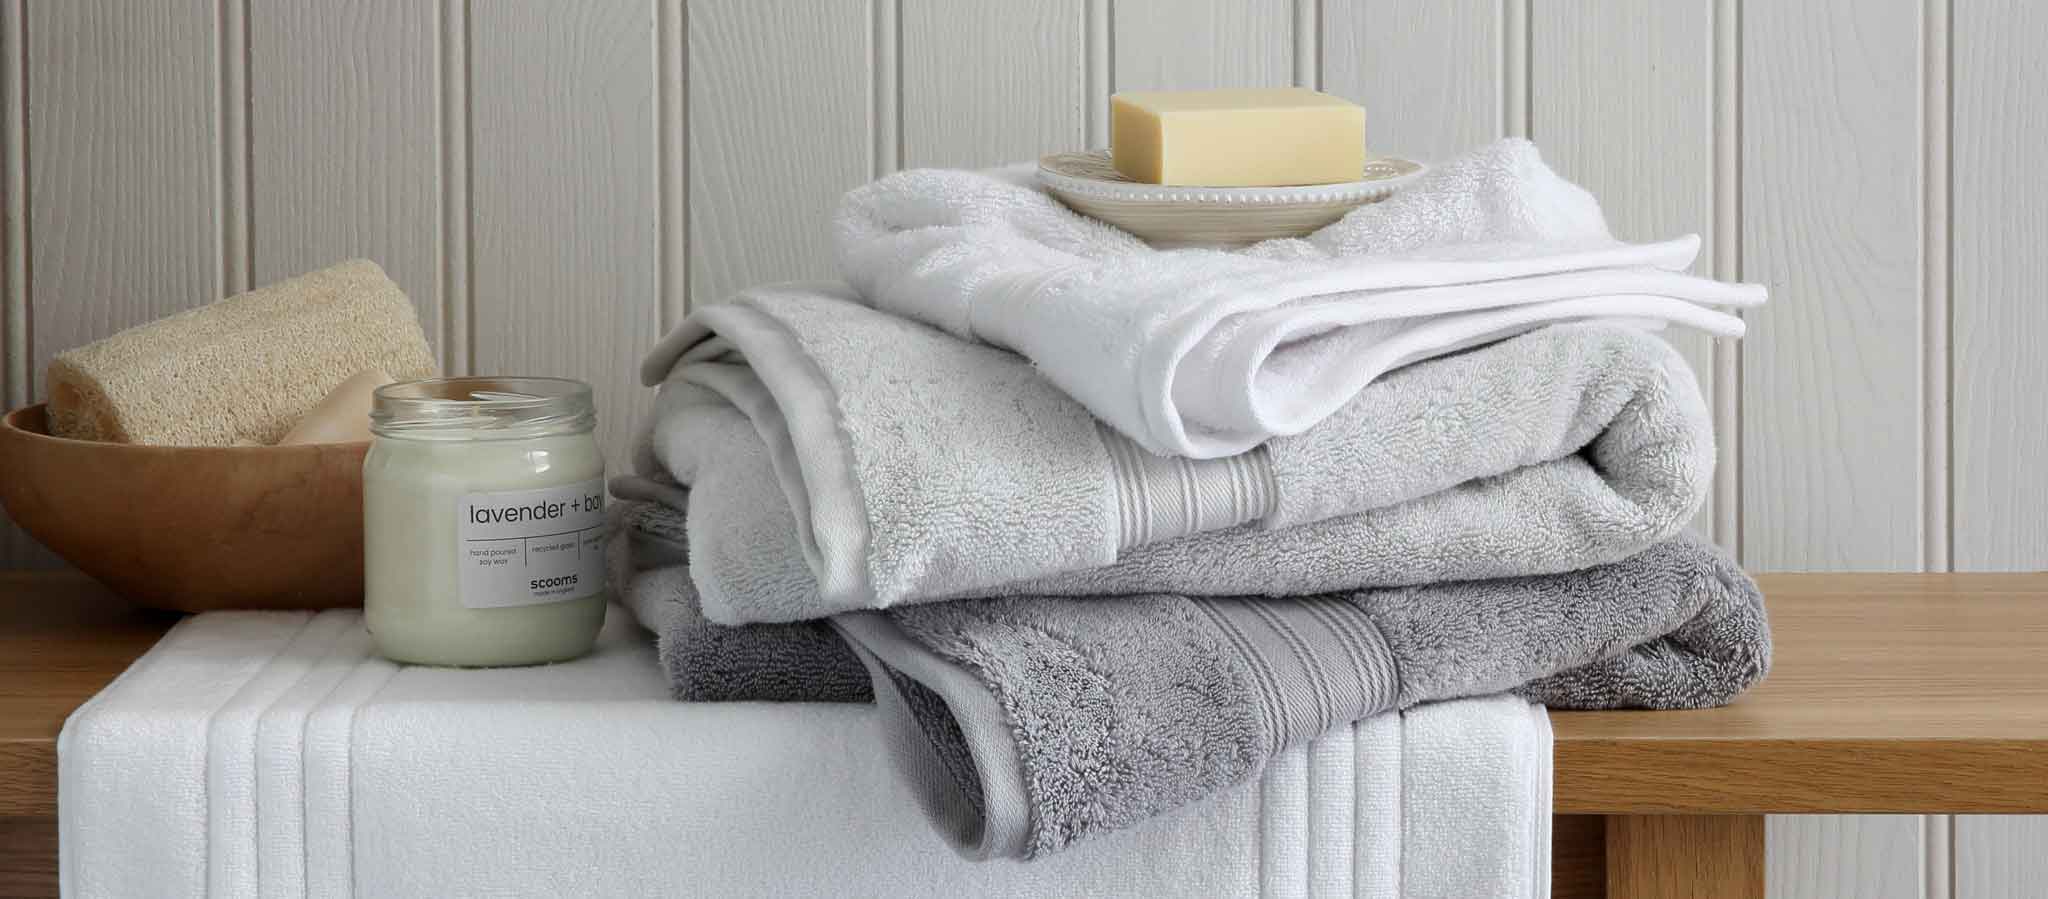 Egyptian cotton towels piled on bench with candle and loofah